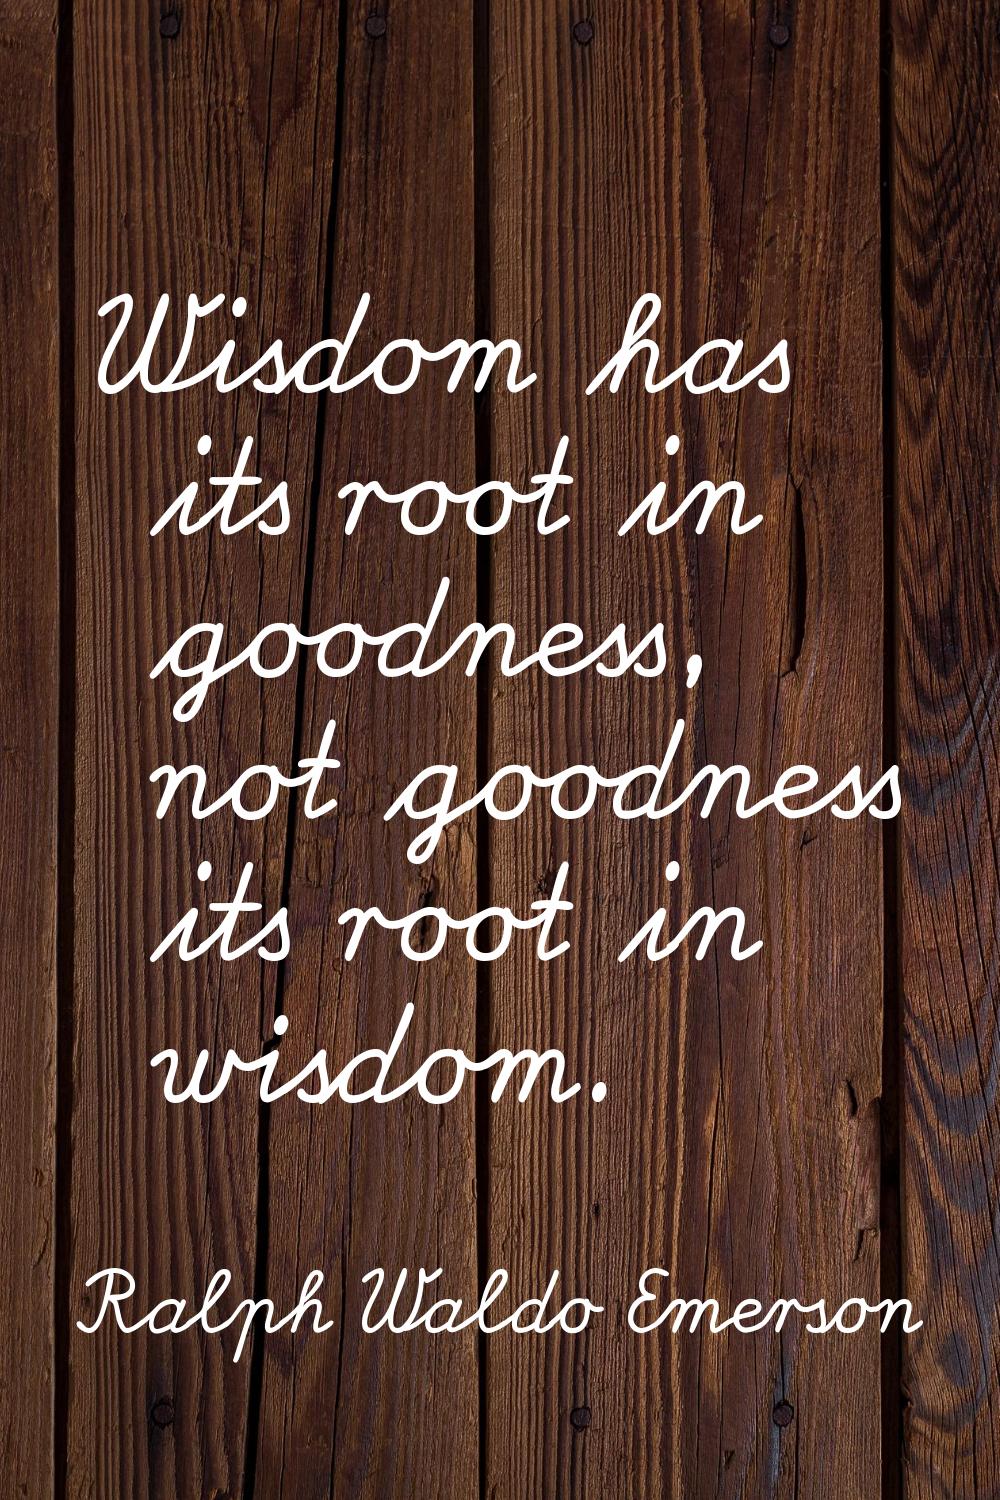 Wisdom has its root in goodness, not goodness its root in wisdom.